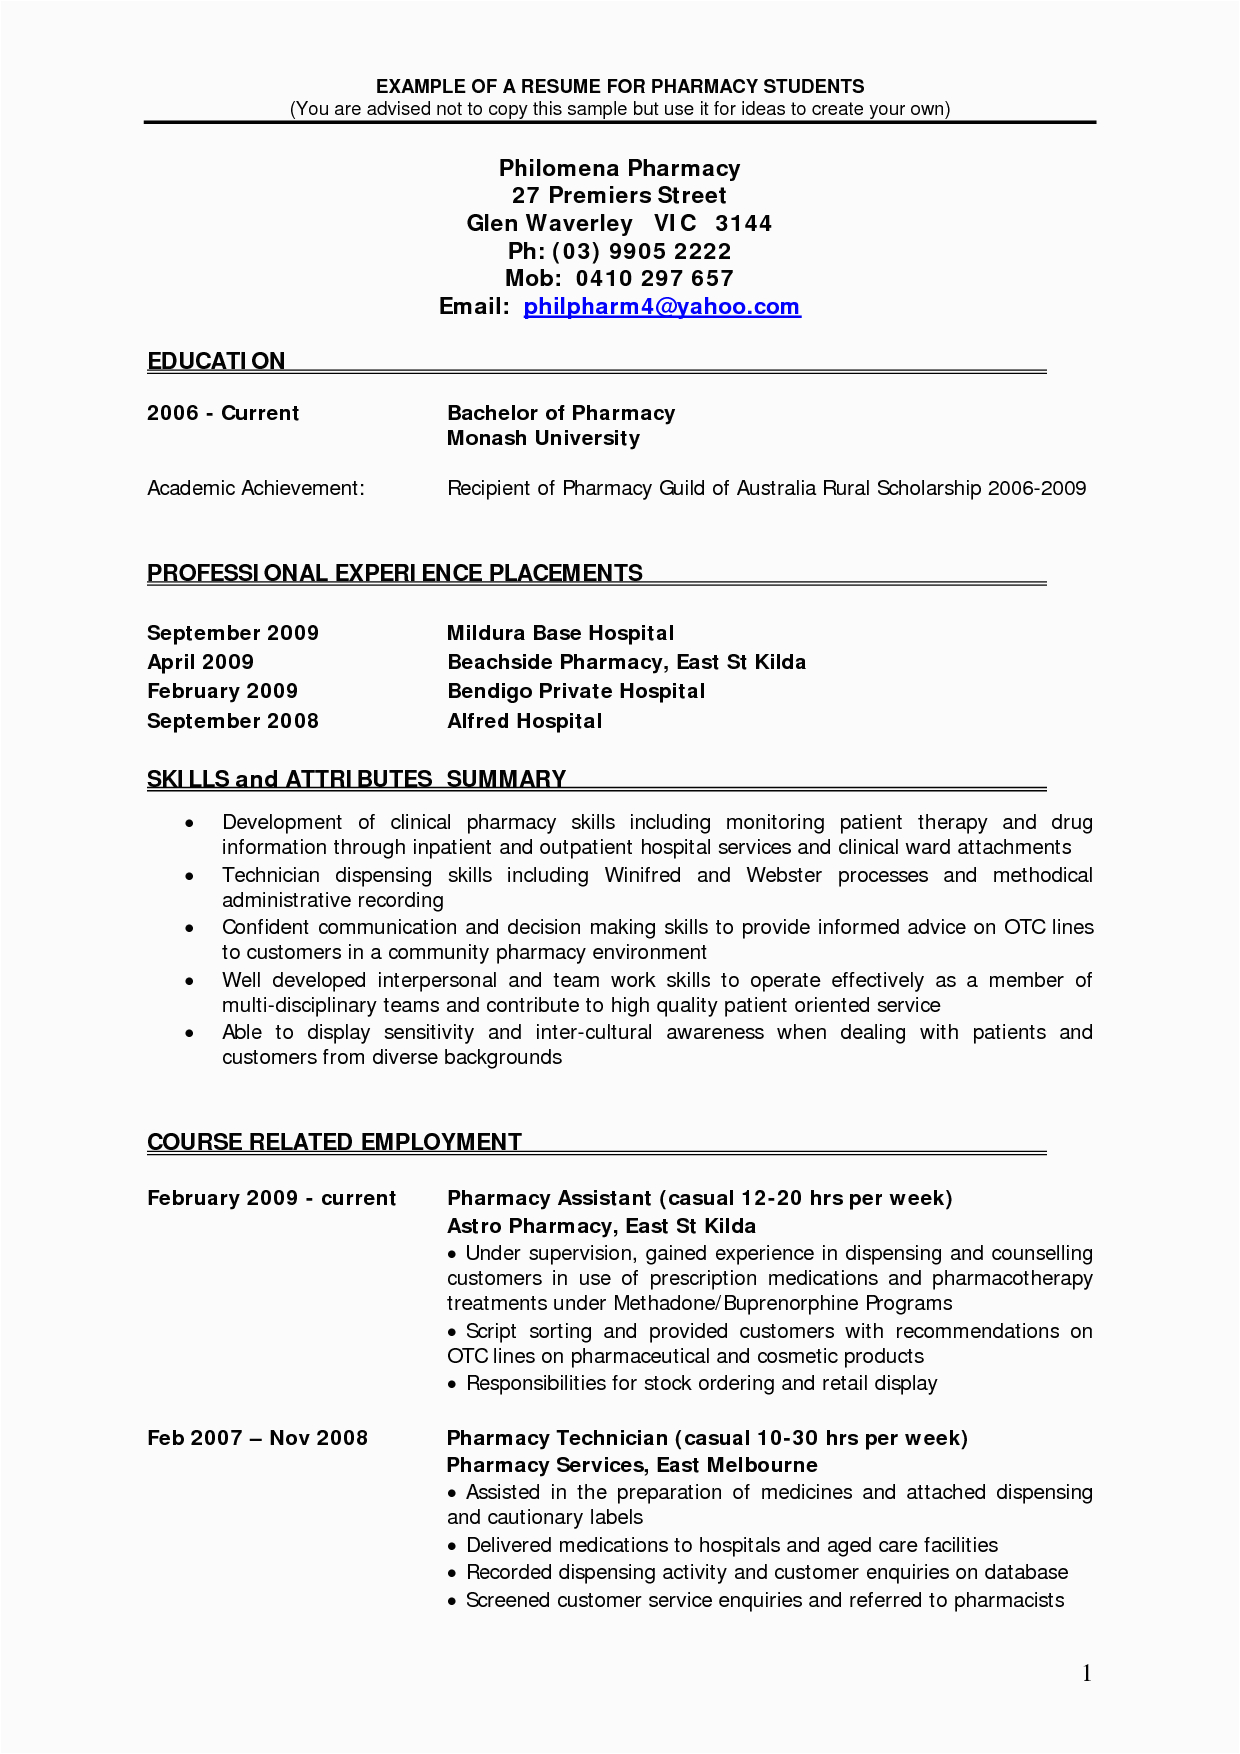 Sample Resume for Pharmacist In the Philippines Resume format for Pharmacy Teacher and the Eighth Day God Created